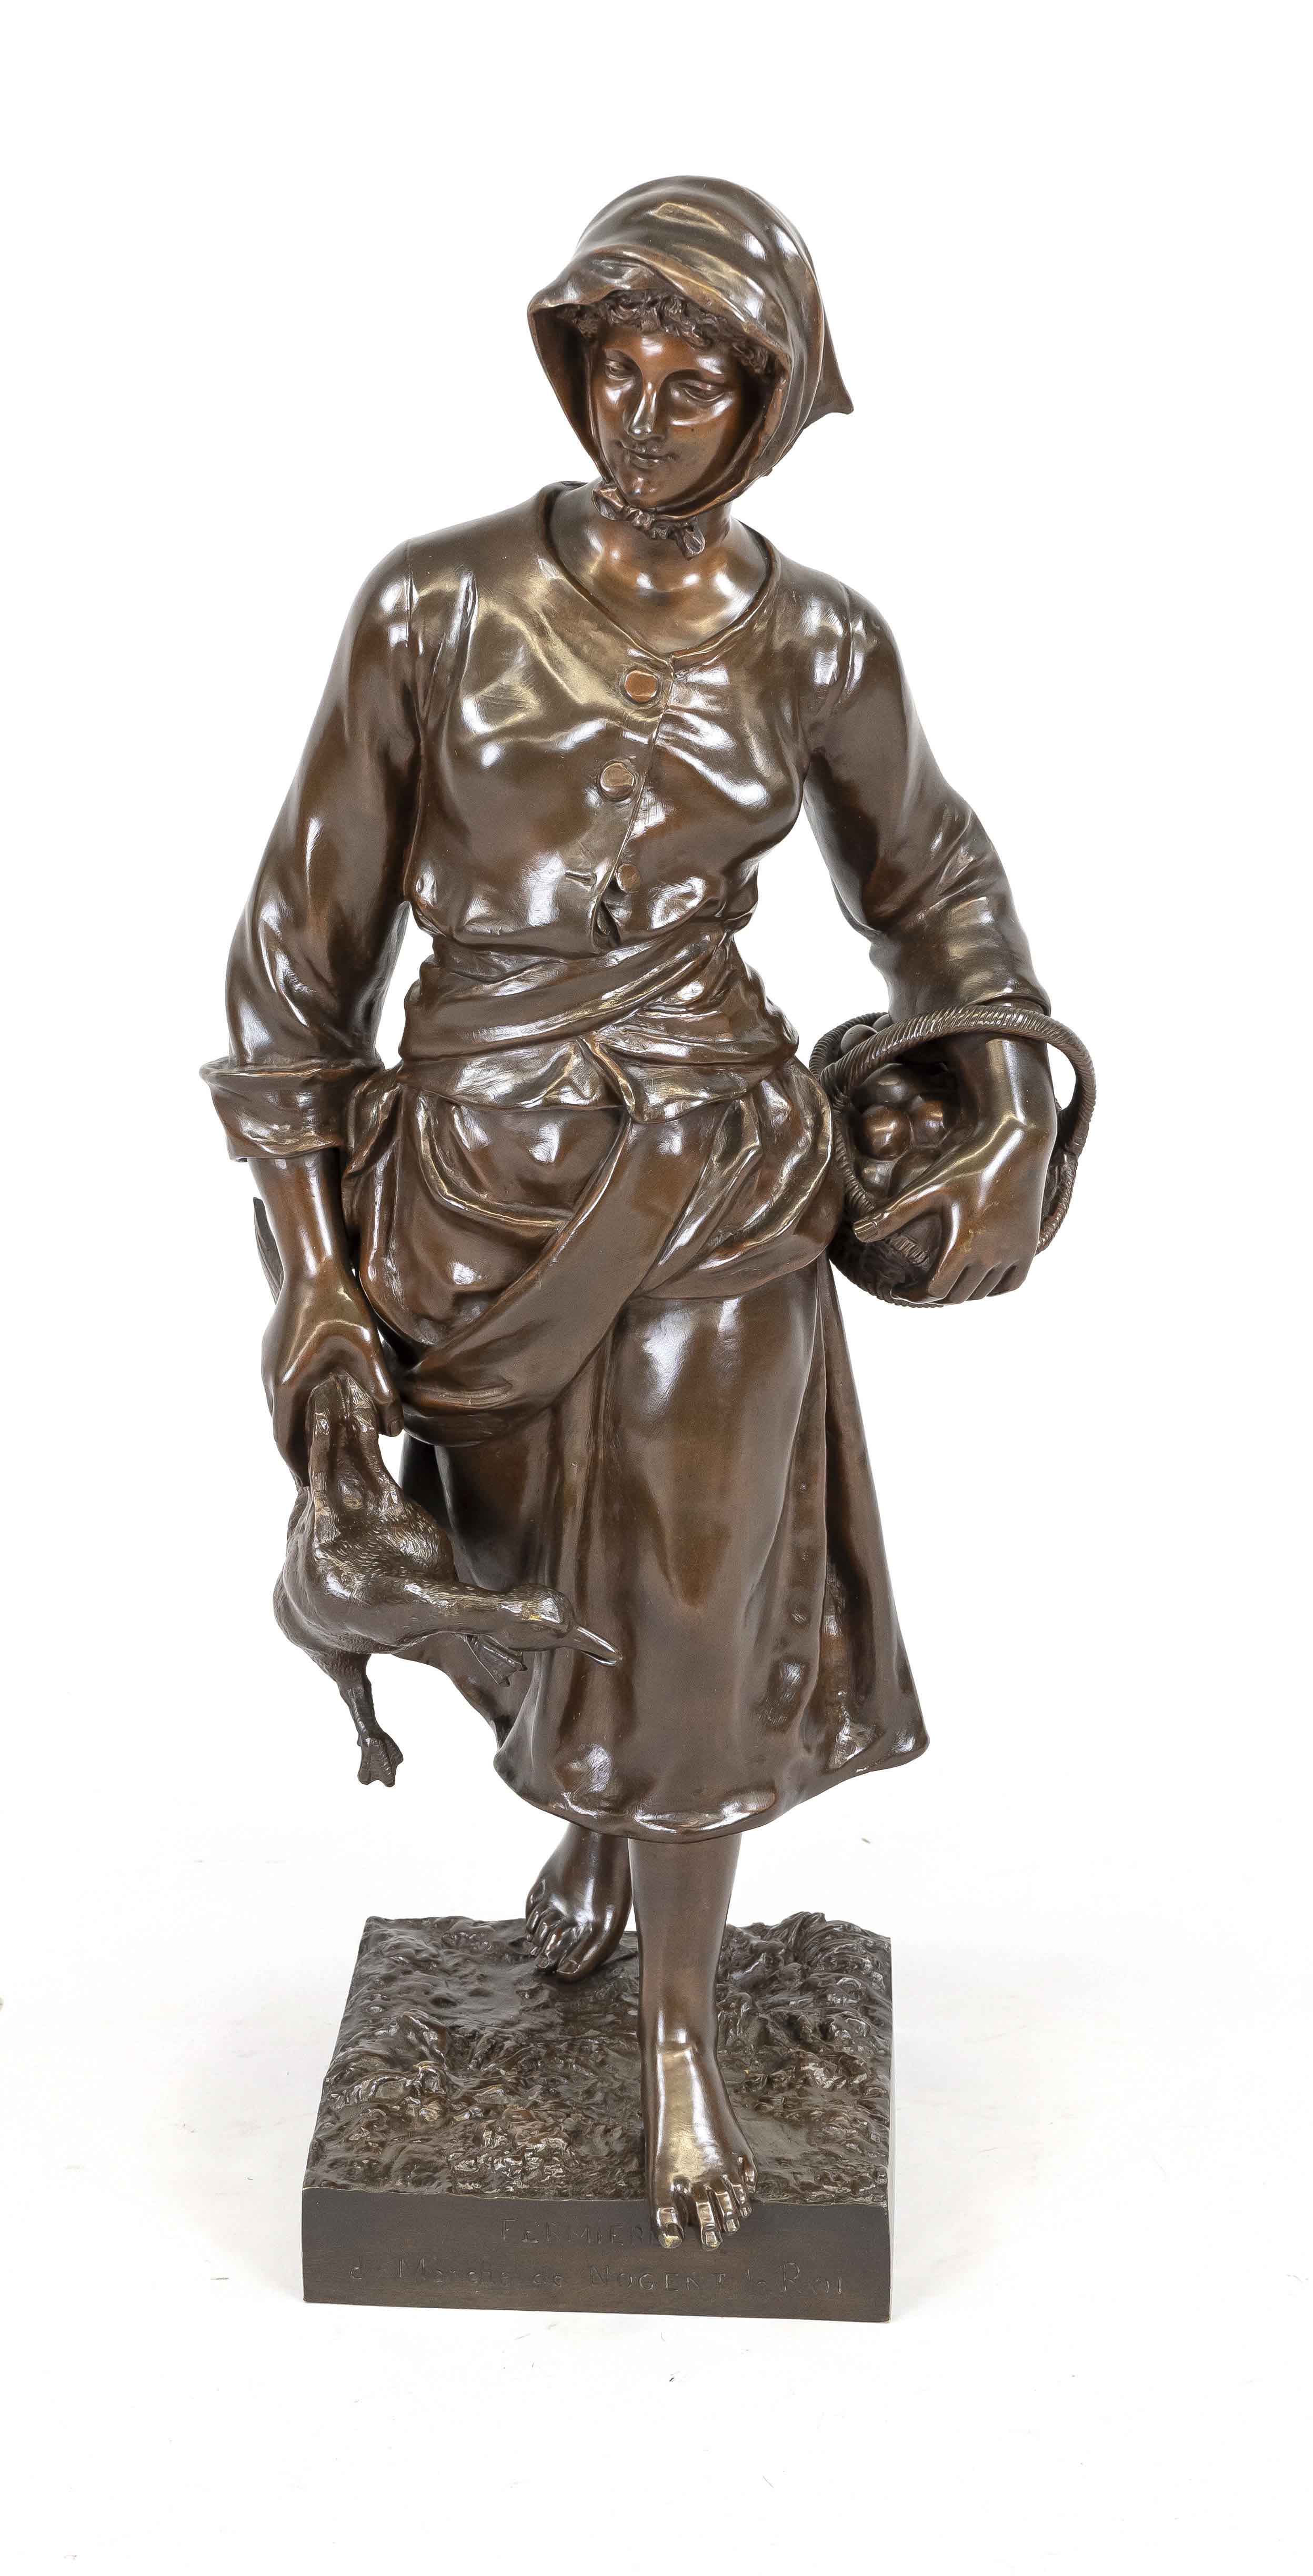 Henri Plé (1853 - 1922), Peasant woman on her way home from the market, brown patinated bronze,